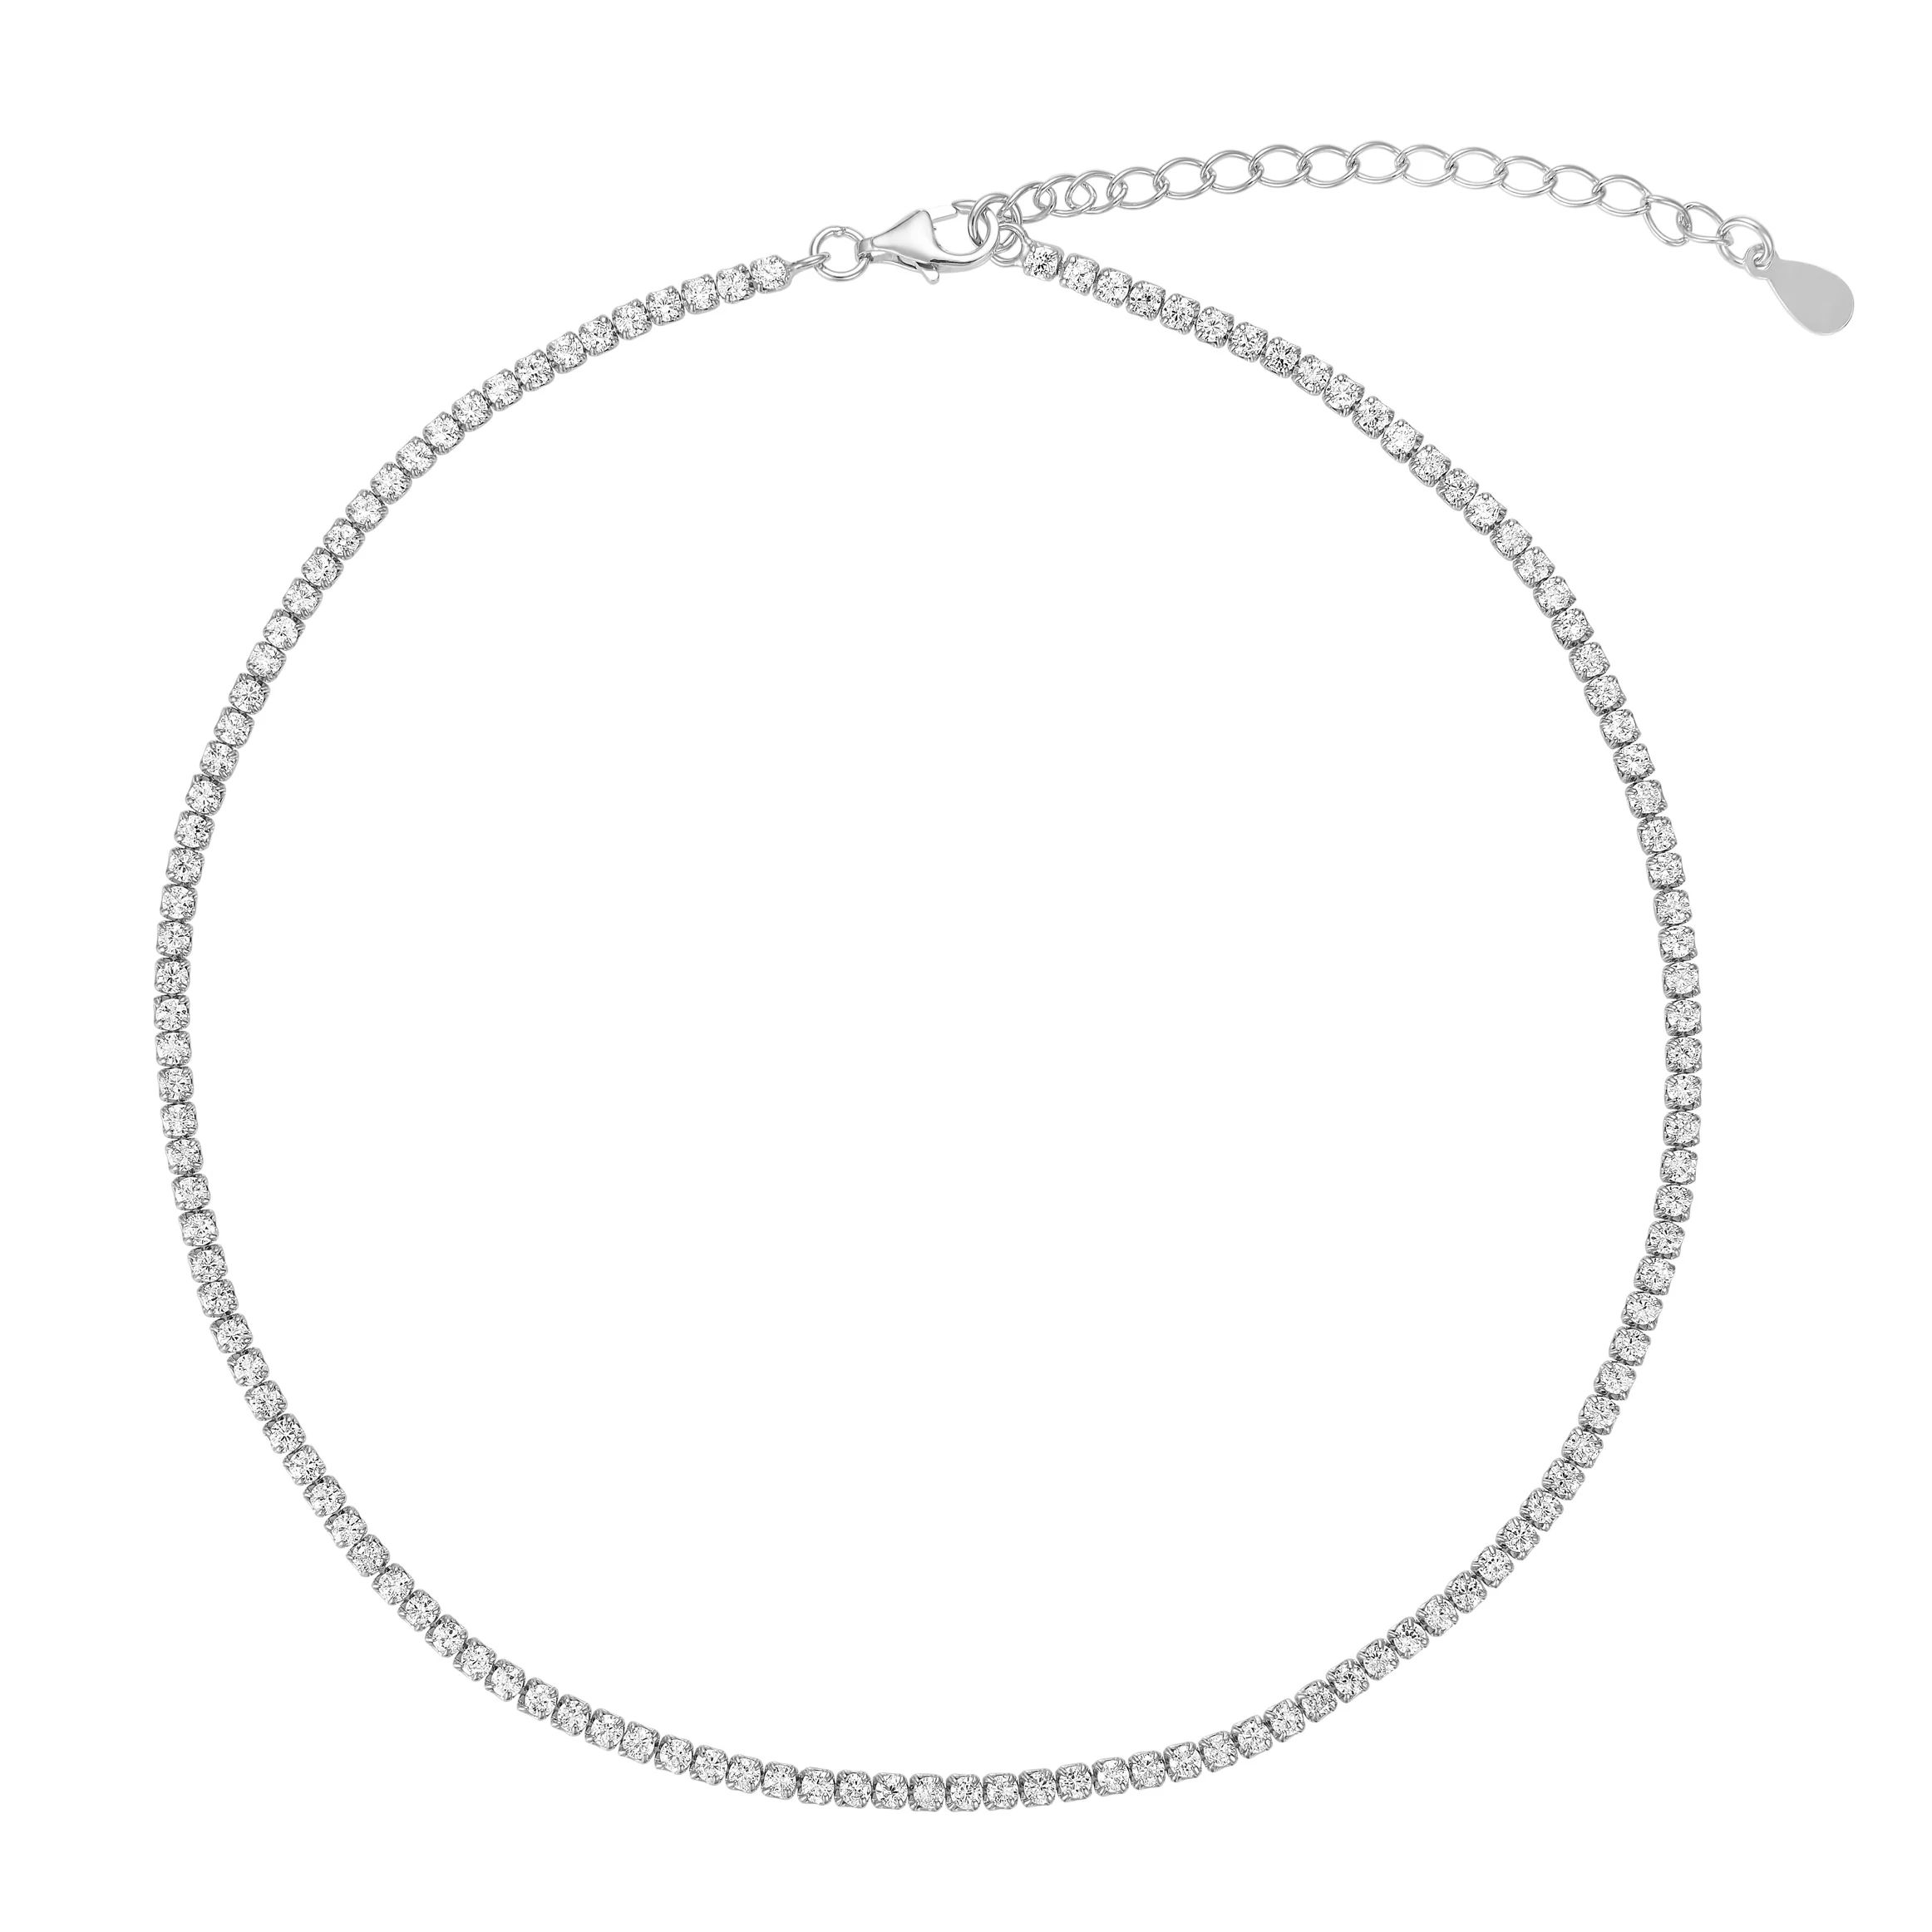 Tennis Necklace - Crystal Stones - Silver | Lola James Jewelry